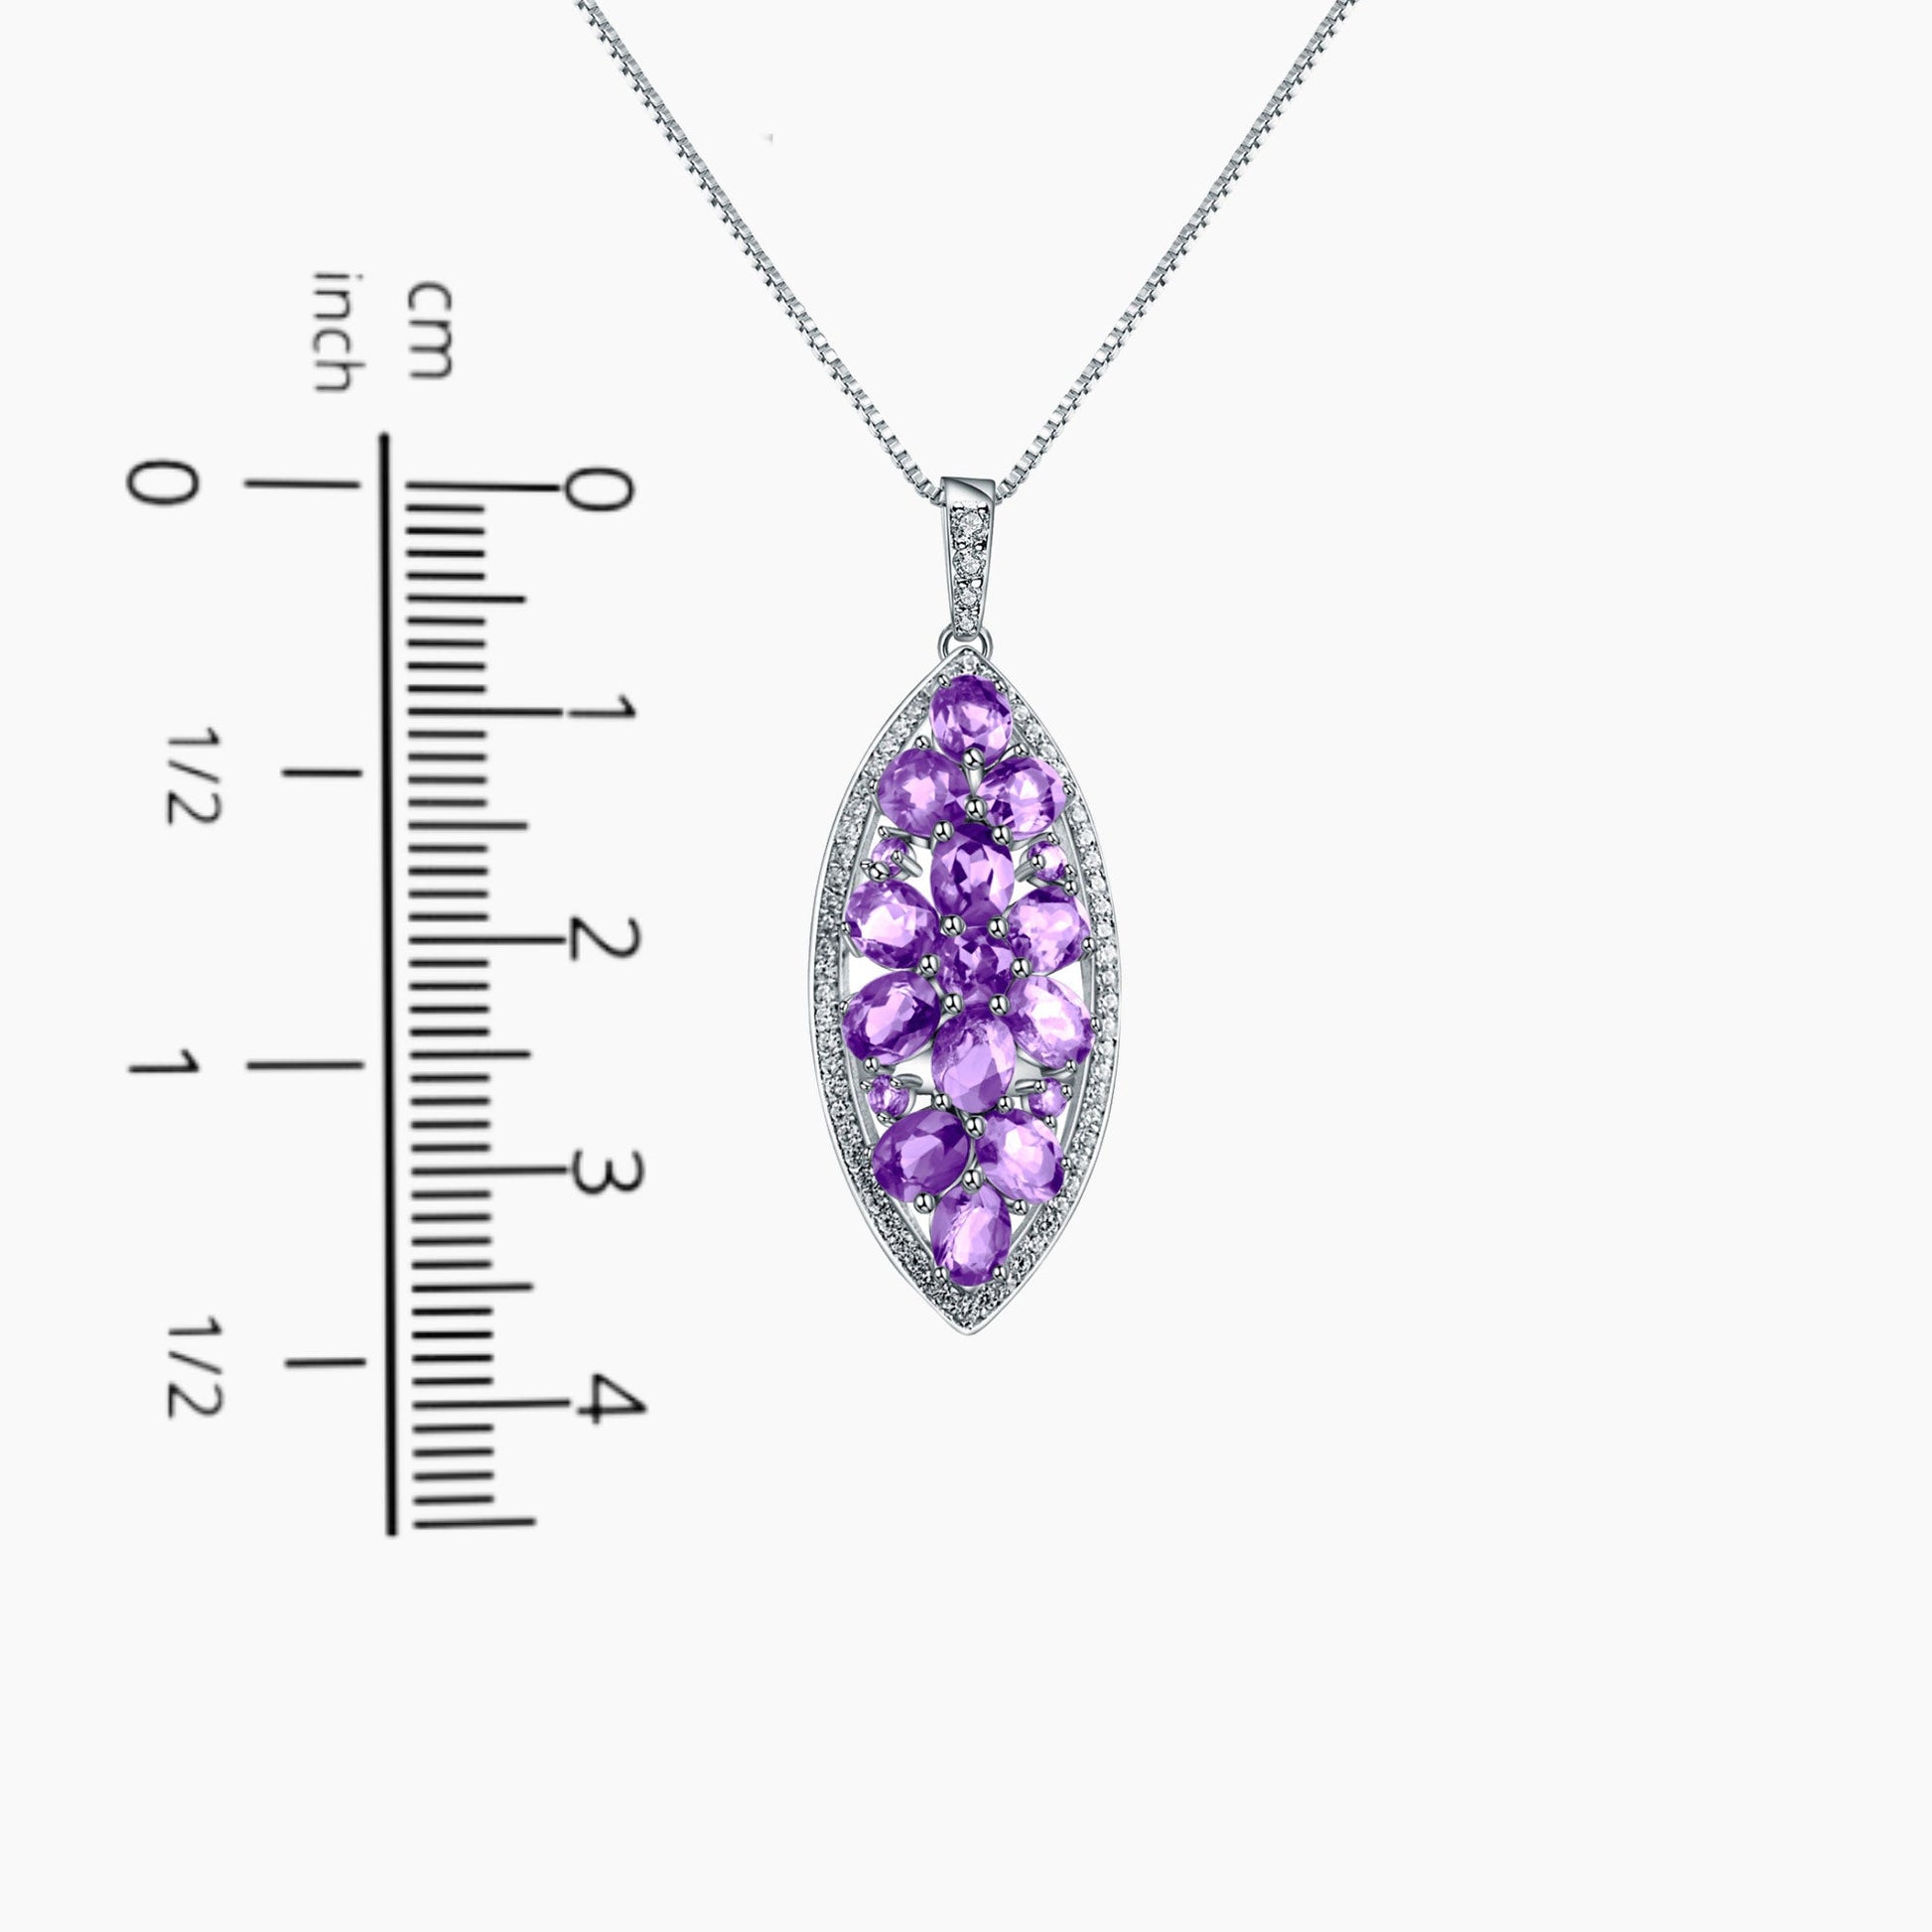 Amethyst Twilight Necklace displayed on a scale to accurately represent its size and dimensions.